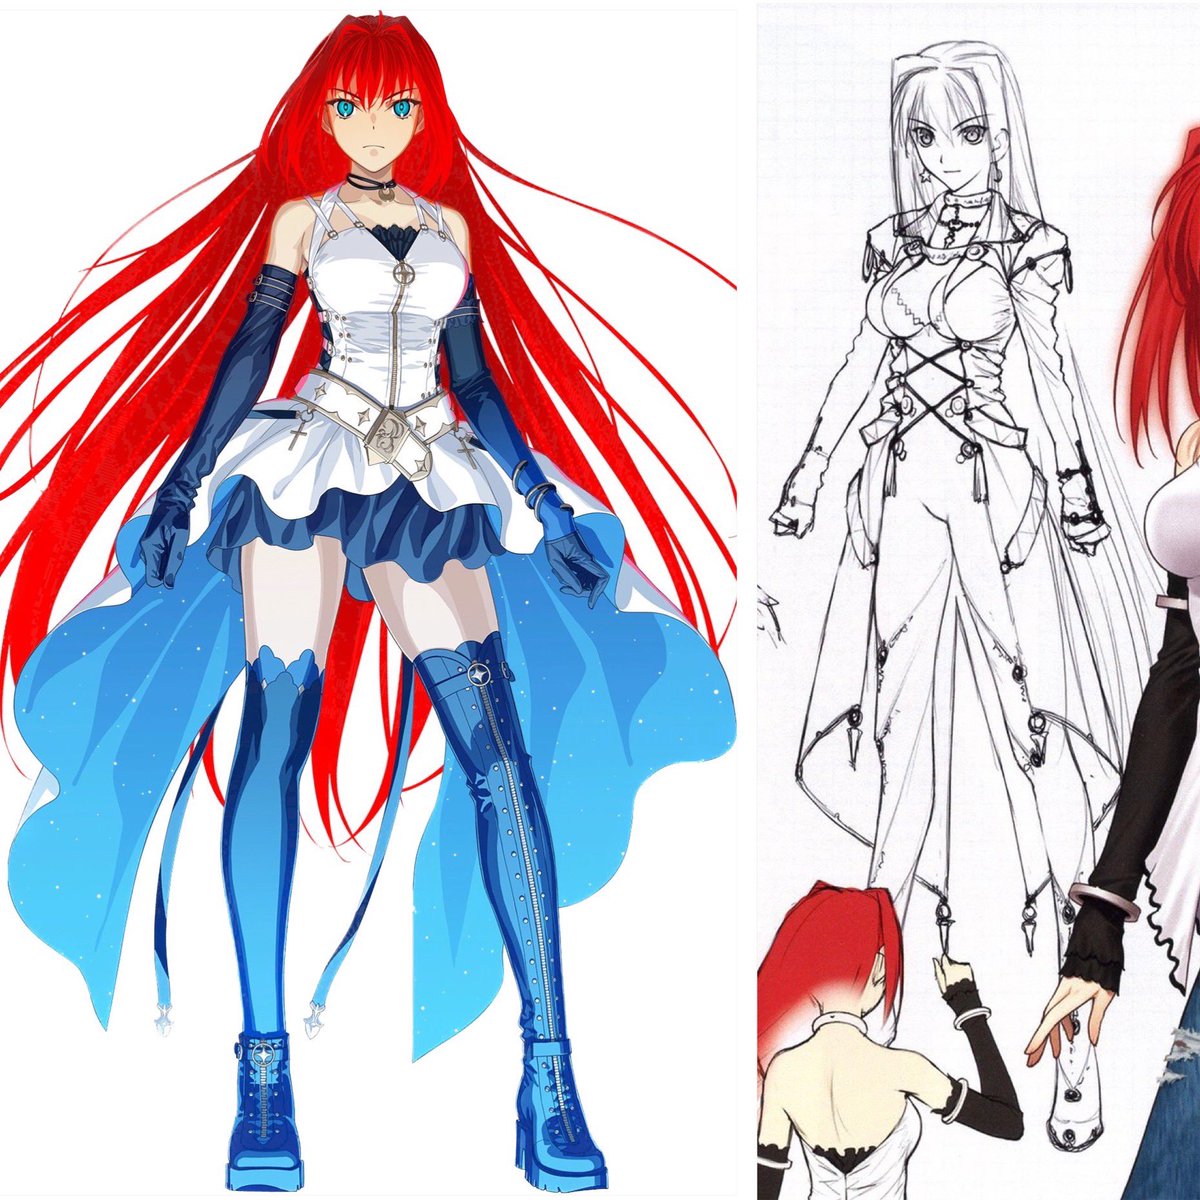 It’s fun to see older concept art of Aoko’s future outfit from Mahoyo look similar to her Fate/Grand Order future design! It’s a nice callback to a design that wasn’t used for Aoko in Mahoyo!